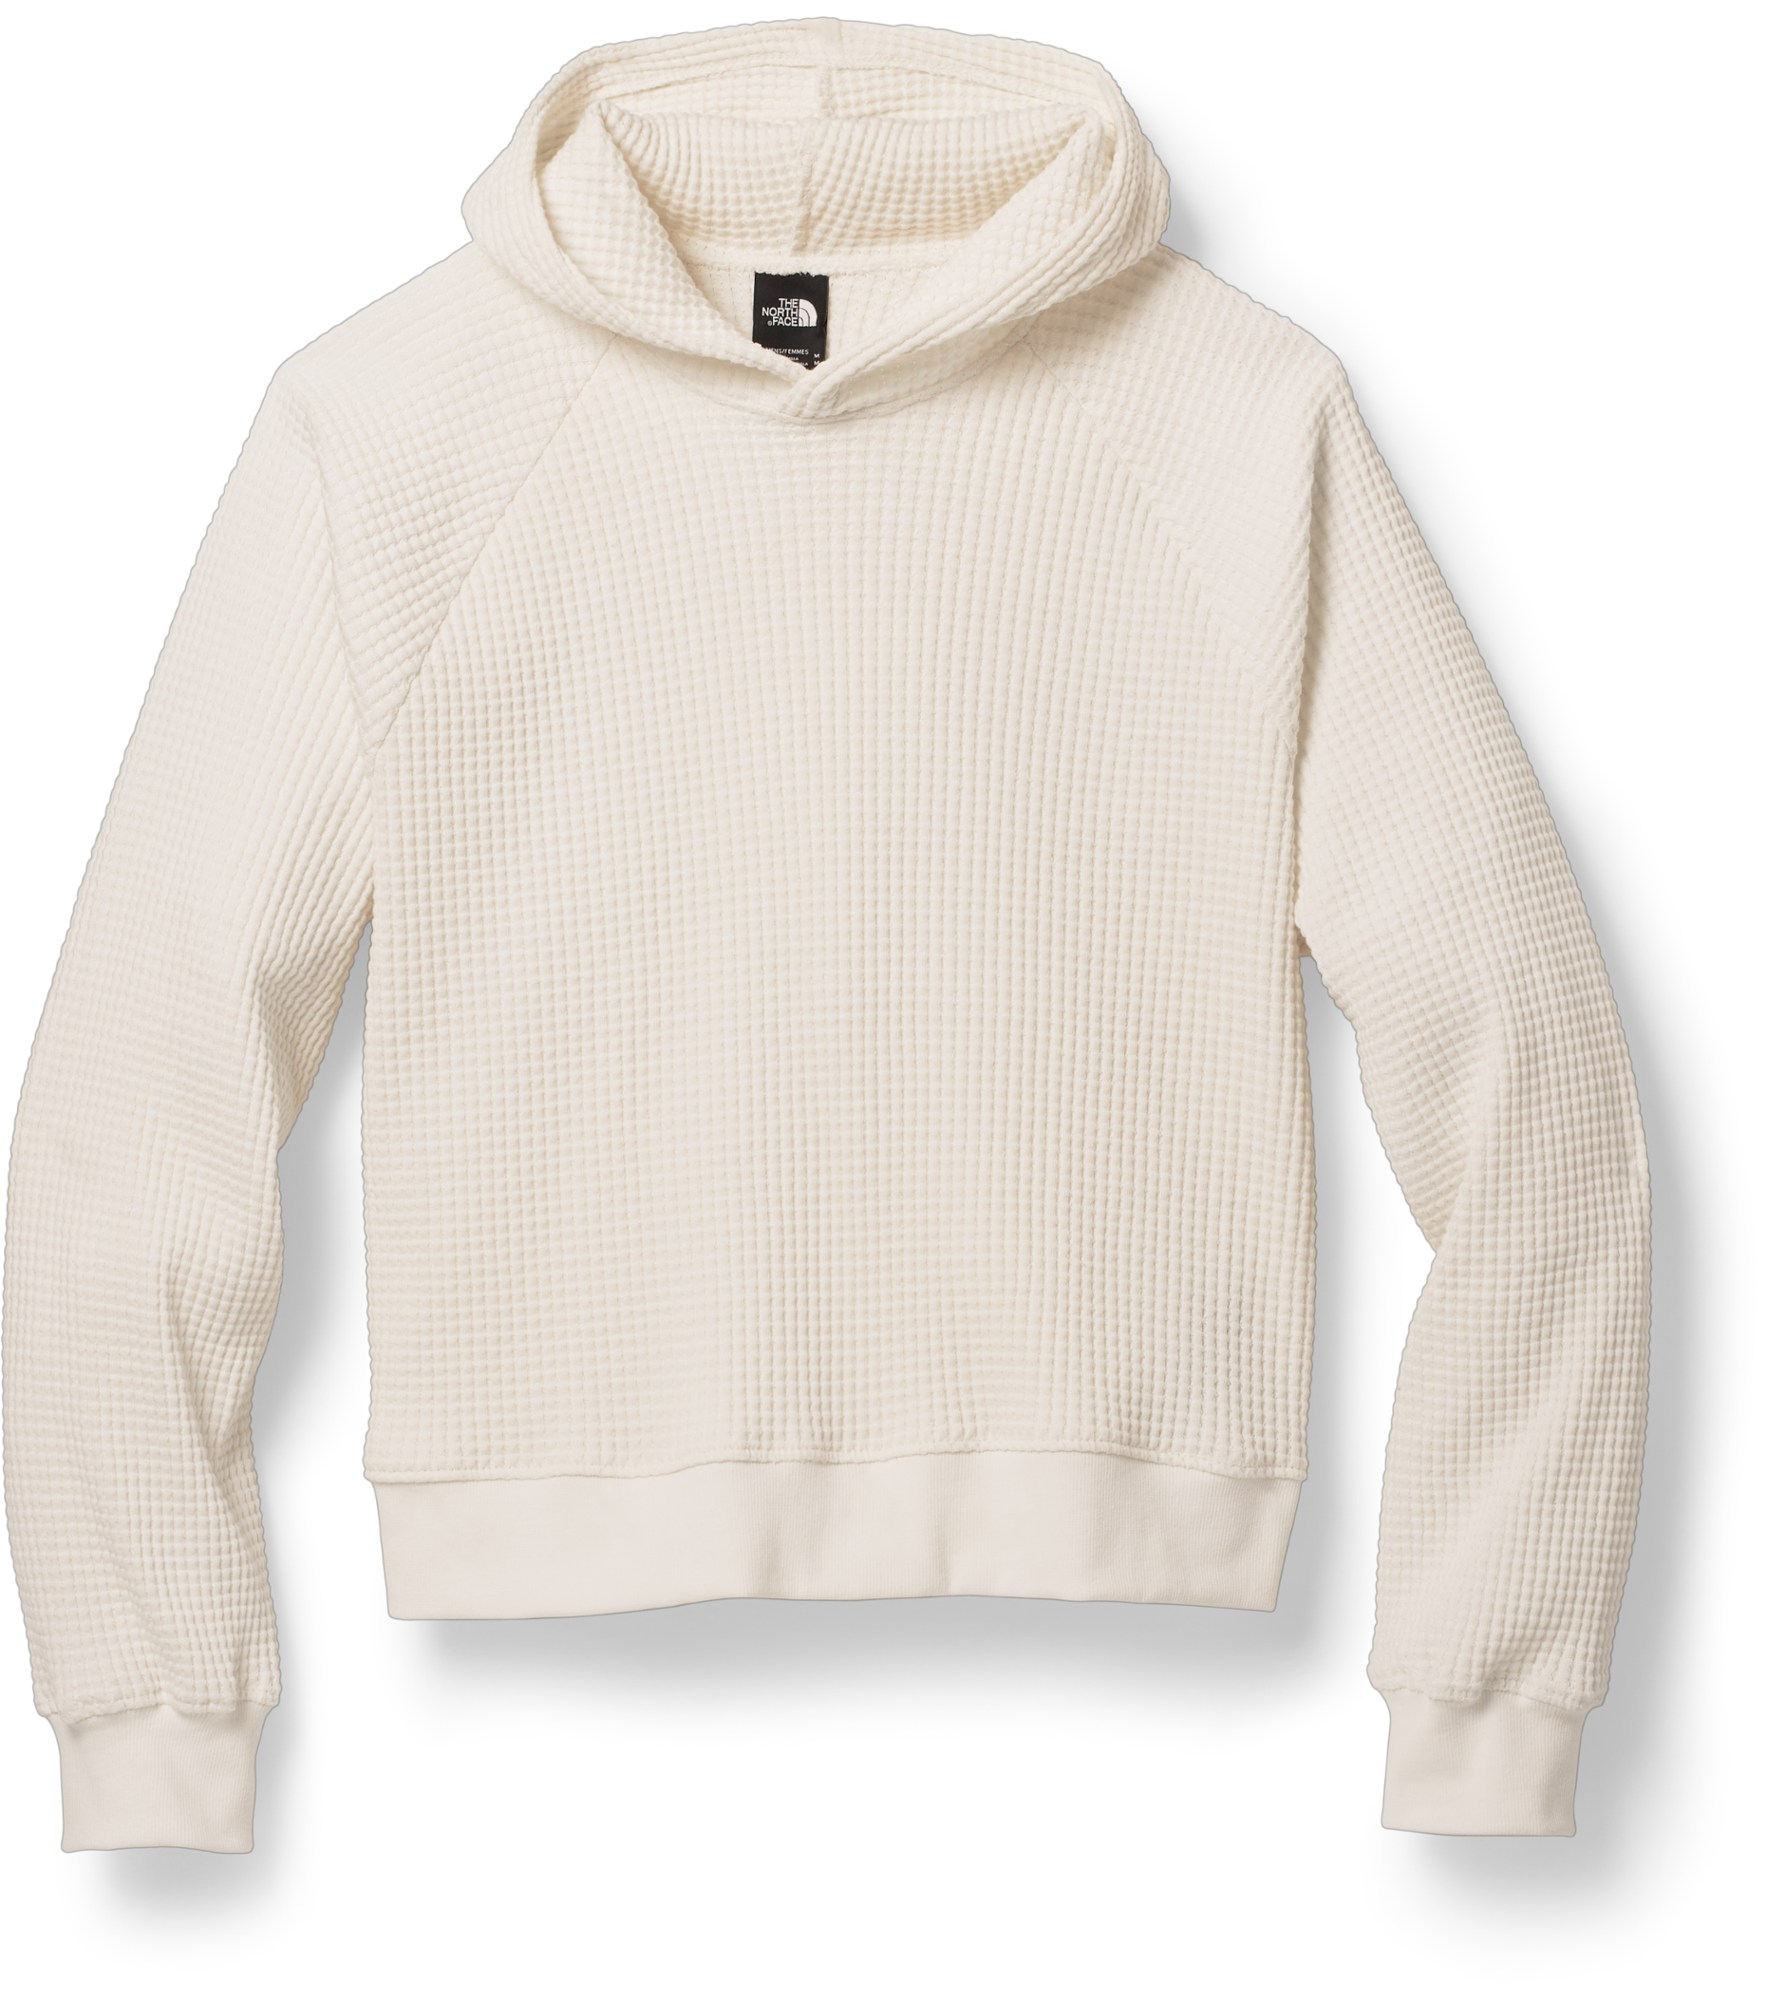 THE NORTH FACE Women's Chabot Hoodie, Gardenia White, Large